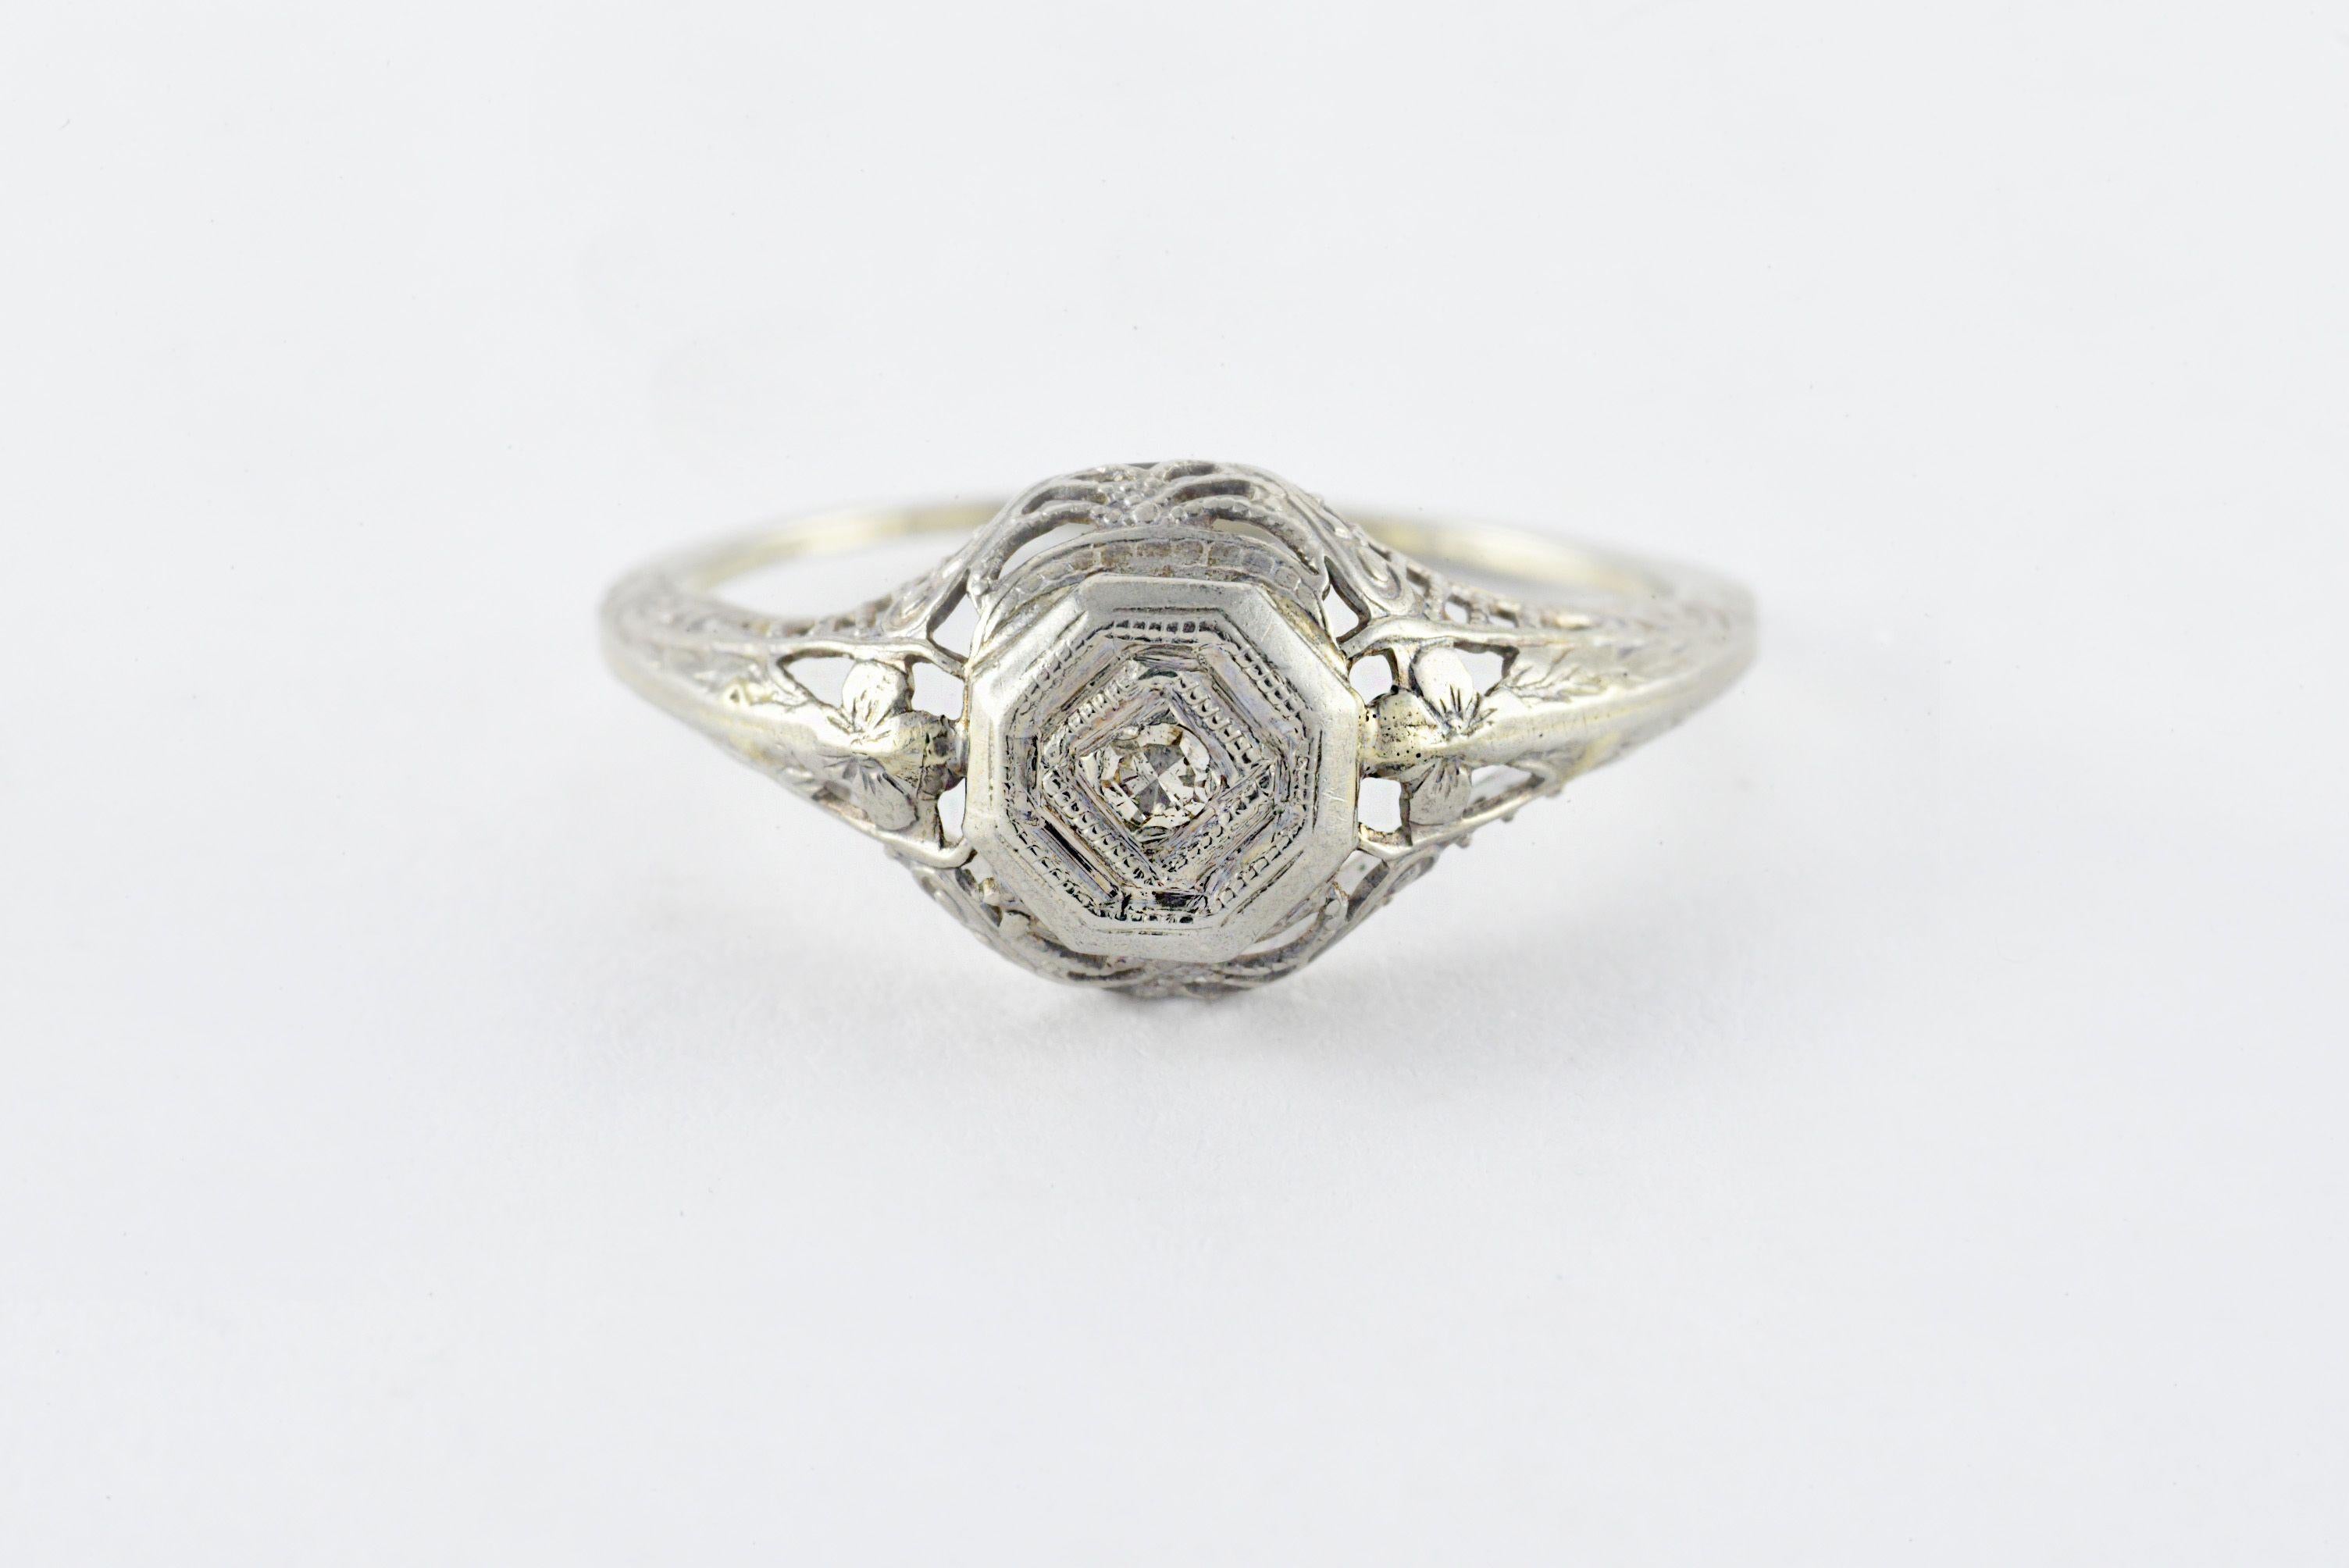 This striking band is meticulously crafted from 18kt white gold with fine filigree details and set with a single cut diamond measuring approximately 0.01 carats. 
